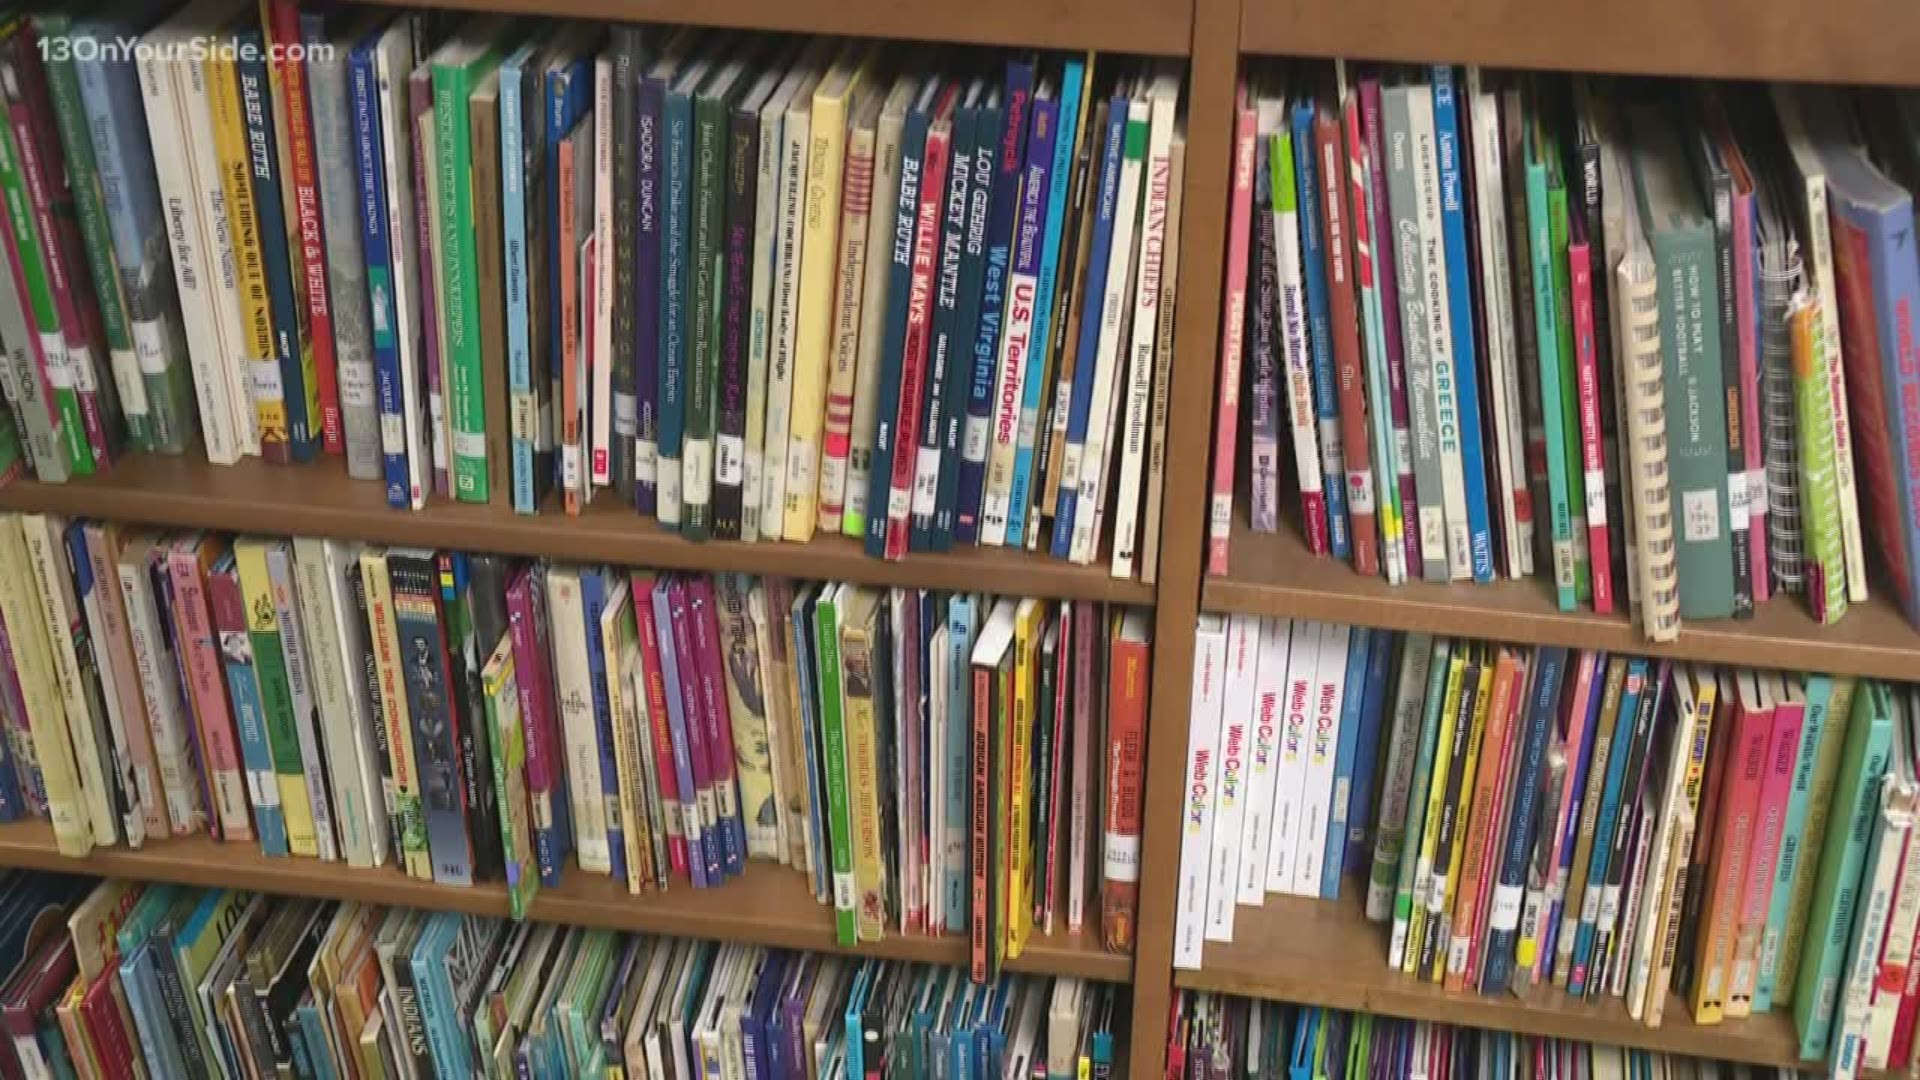 Embrace Books provides around 50,000 free books annually to individuals and community partners in the Muskegon area.